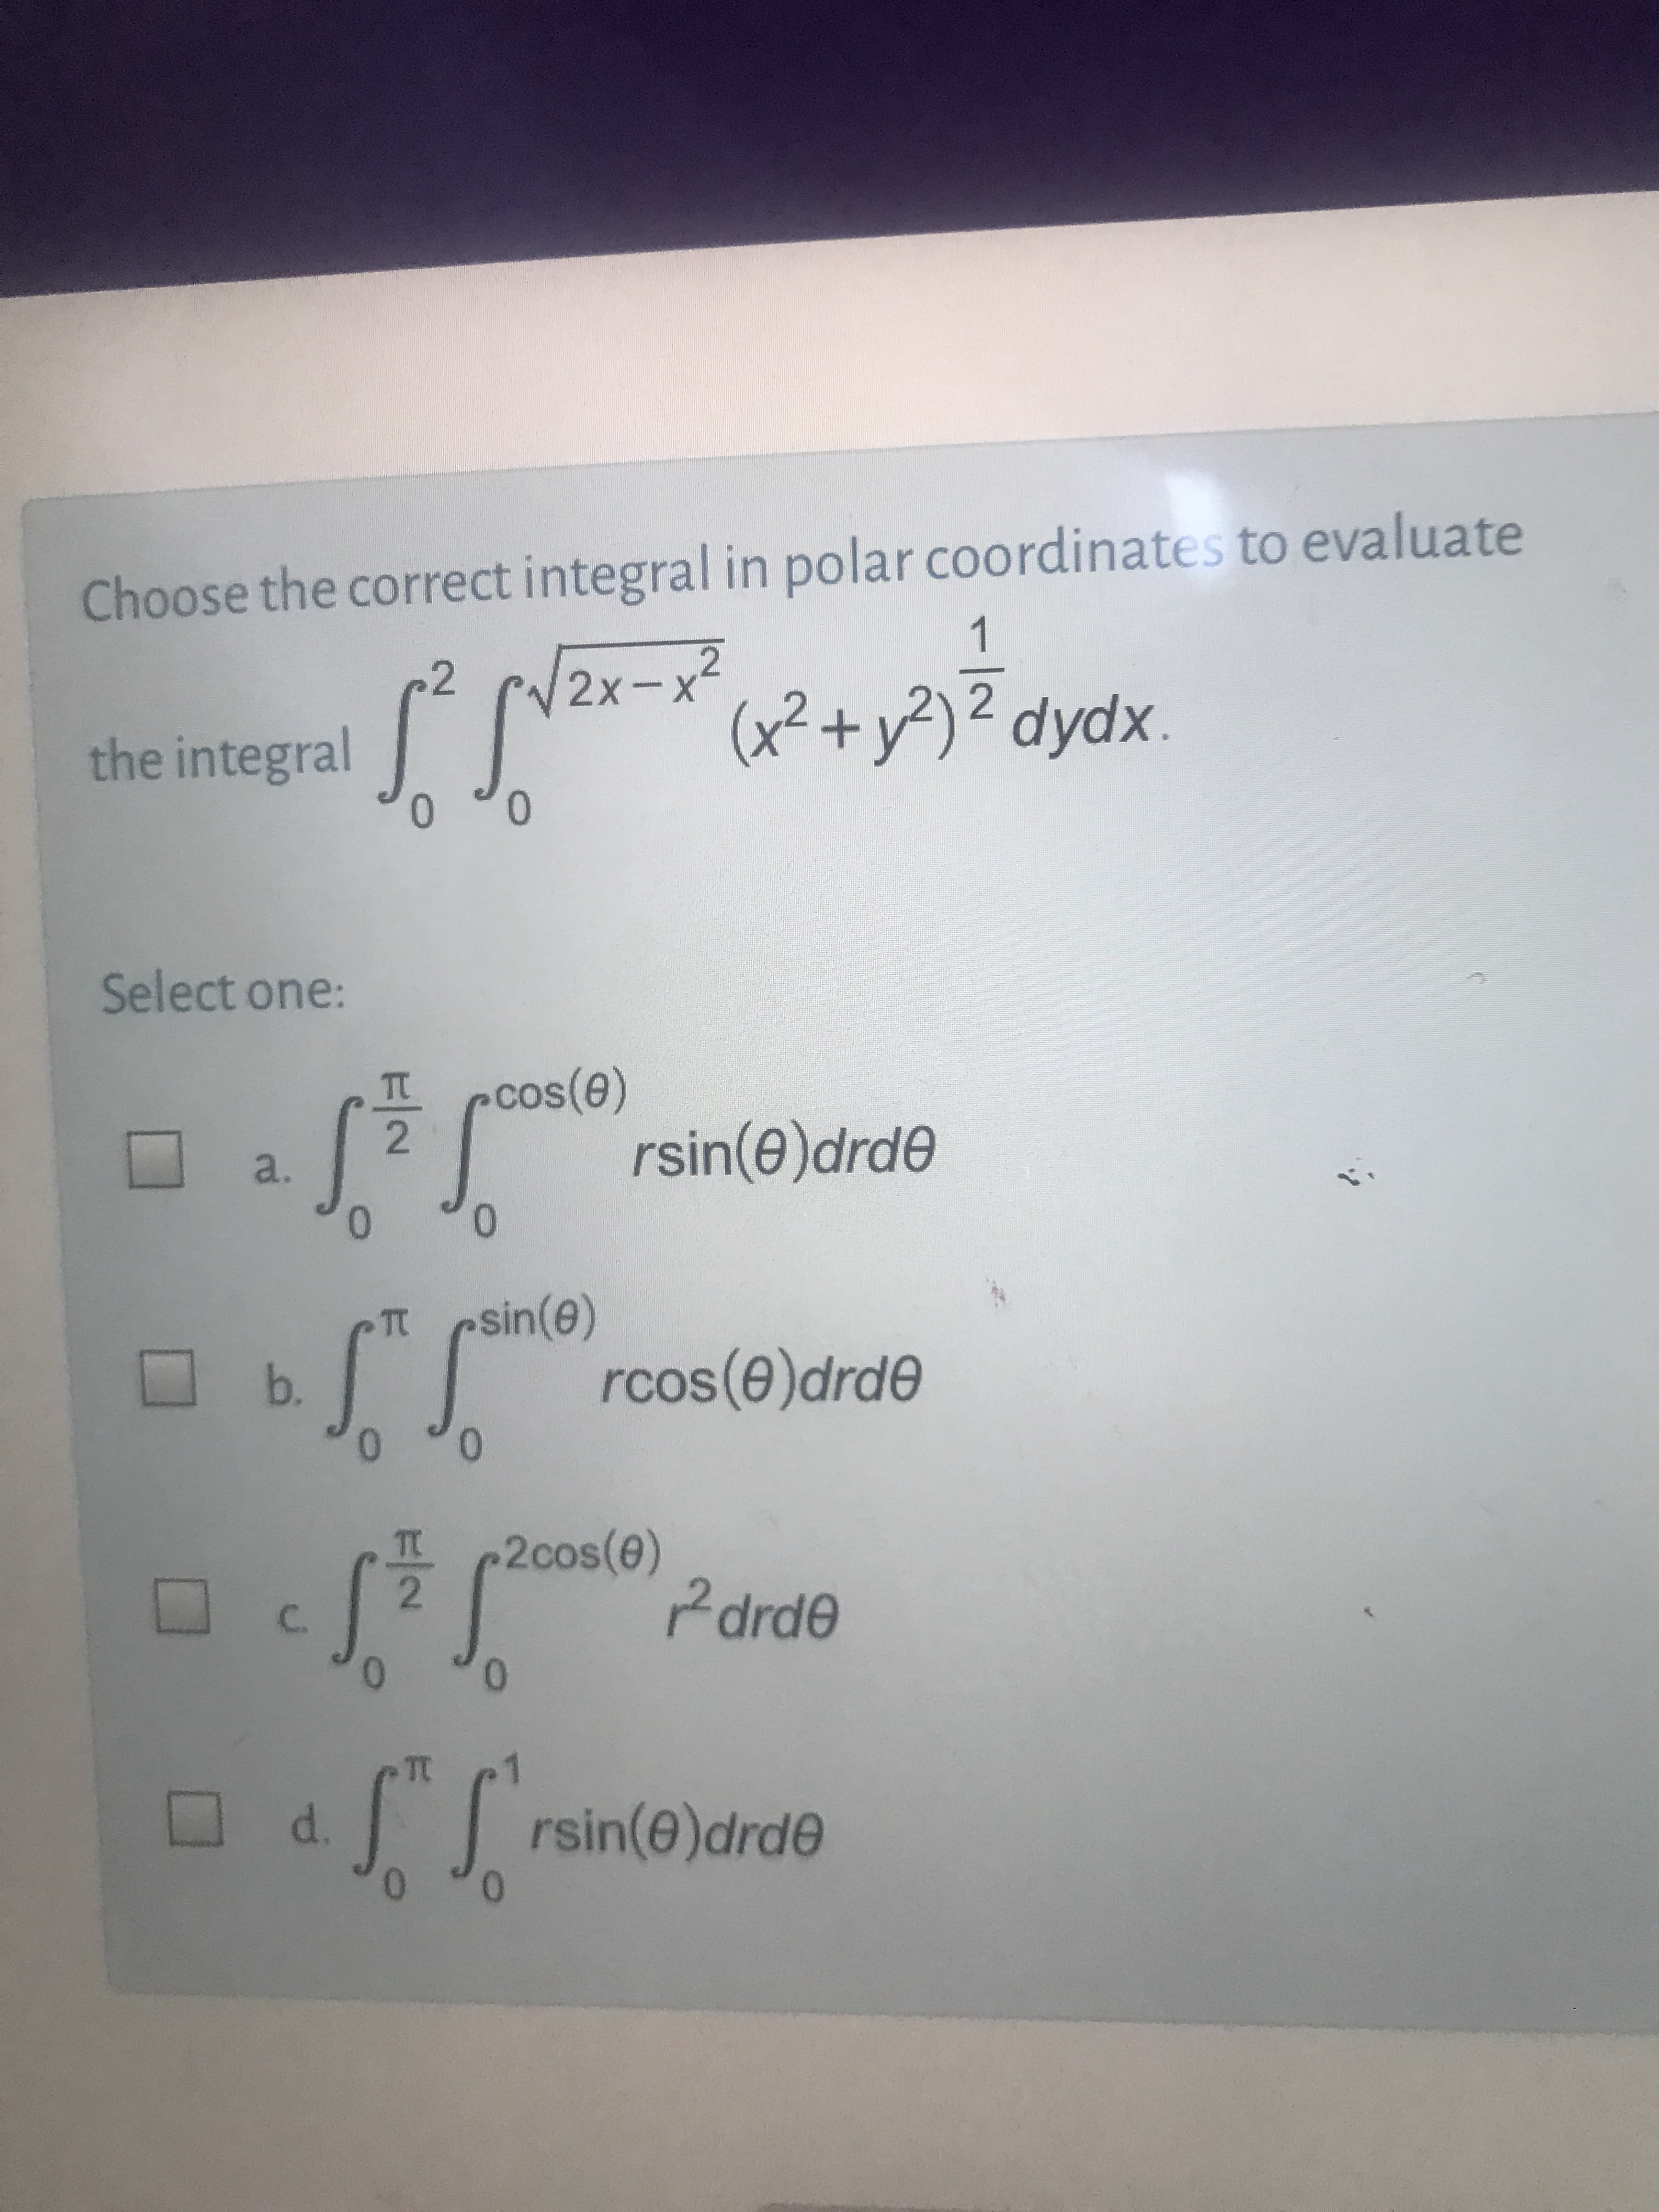 Choose the correct integral in polar coordinates to evaluate
1
2
2
the integral
0,
12x-*
2x-x
(x²+y²)² dydx.
